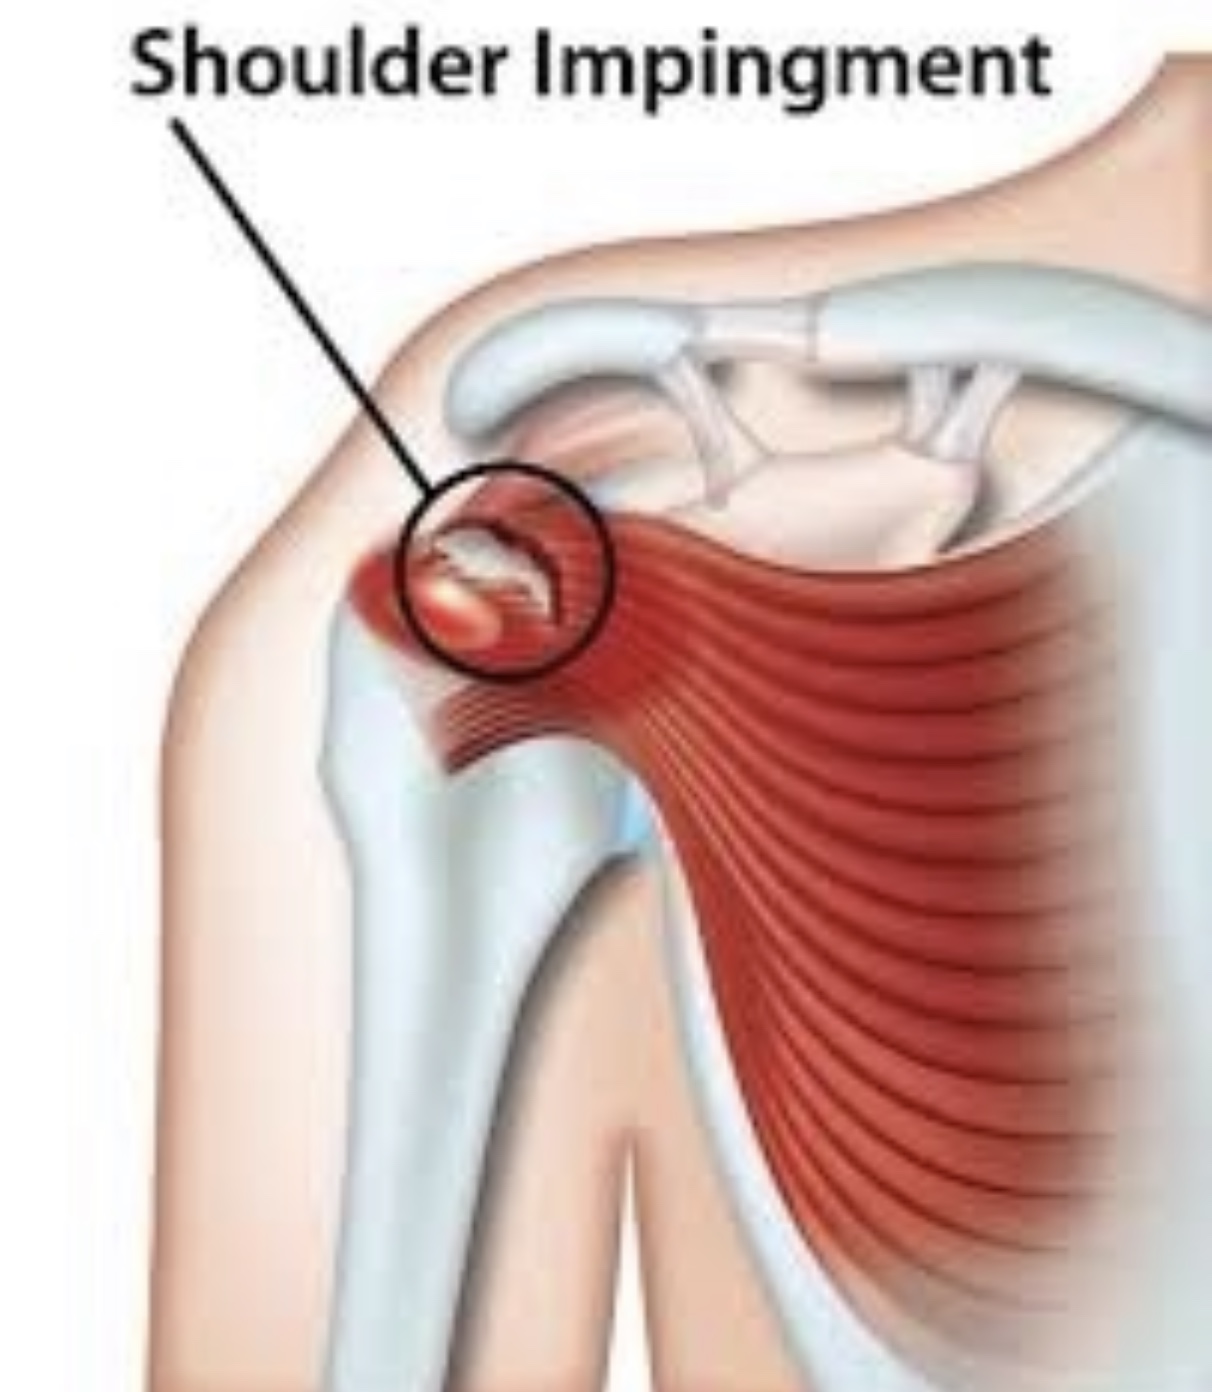 Shoulder Pain And Physical Therapy Core Omaha Explains C O R E Physical Therapy And